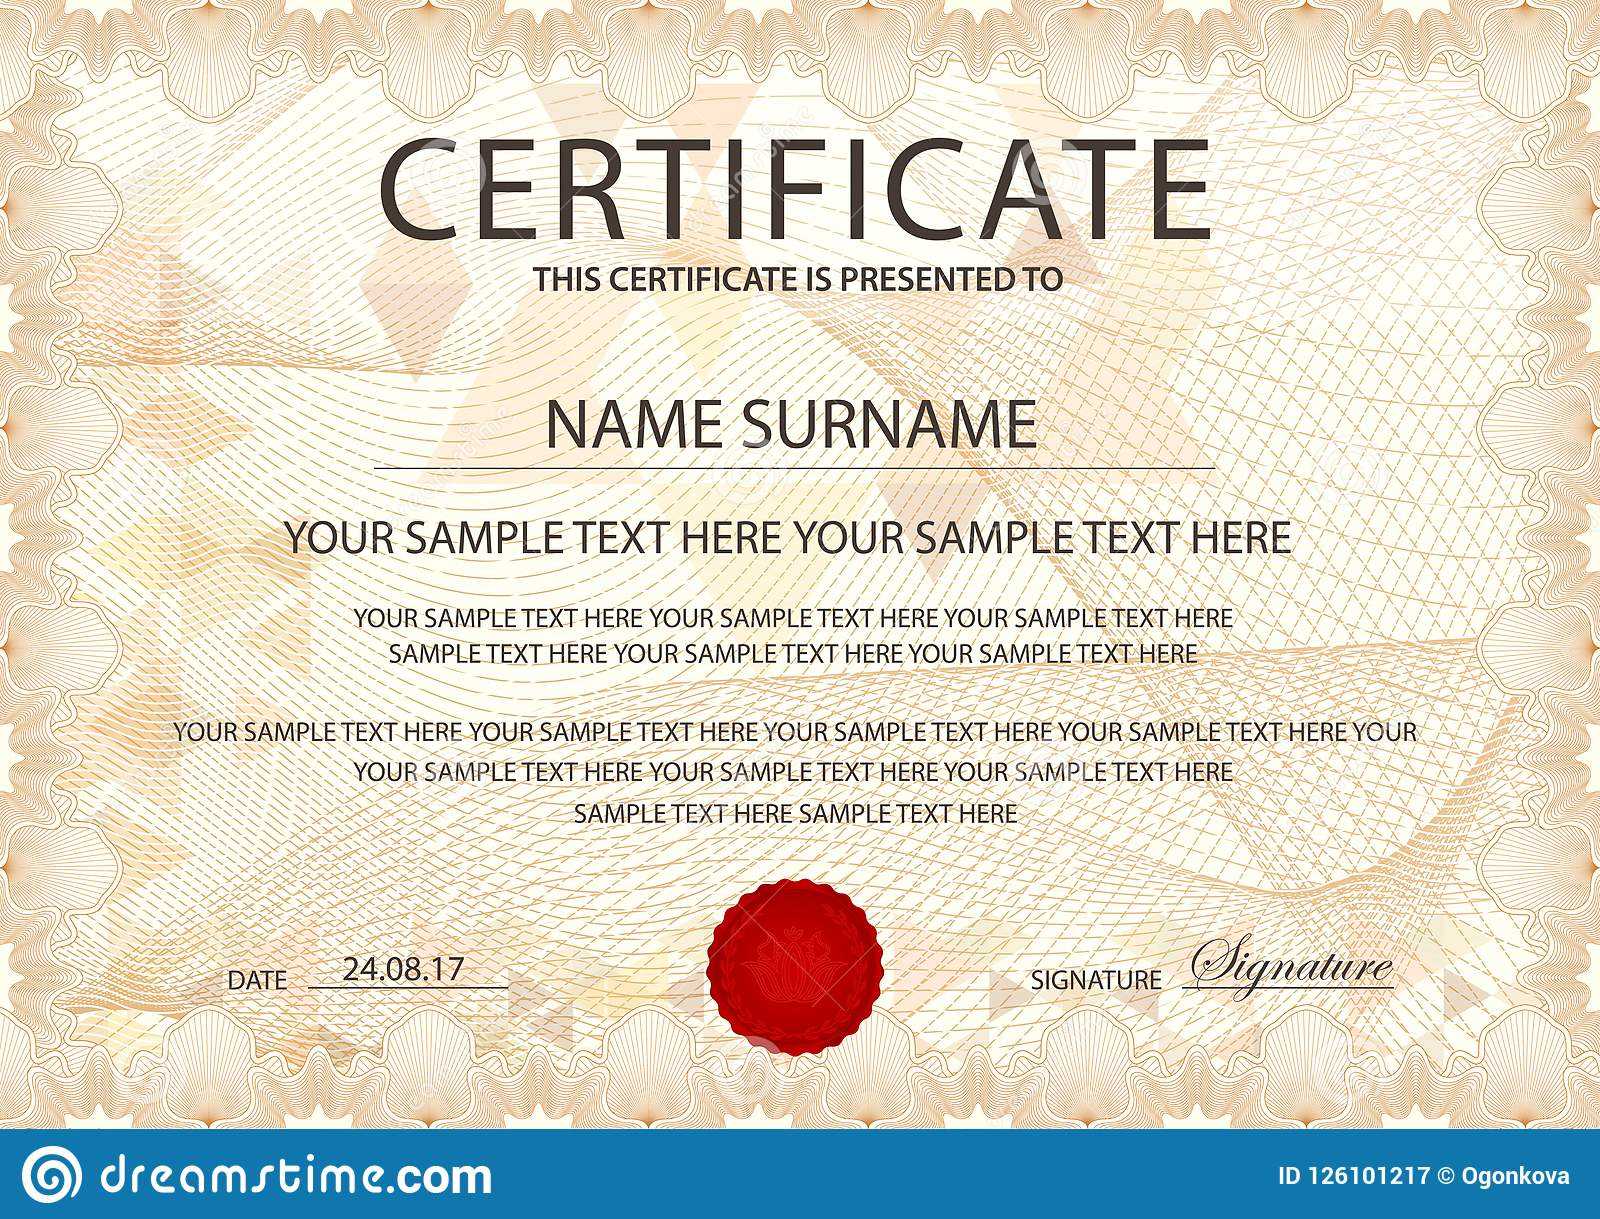 Certificate Template With Guilloche Pattern, Frame Border Inside First Place Certificate Template